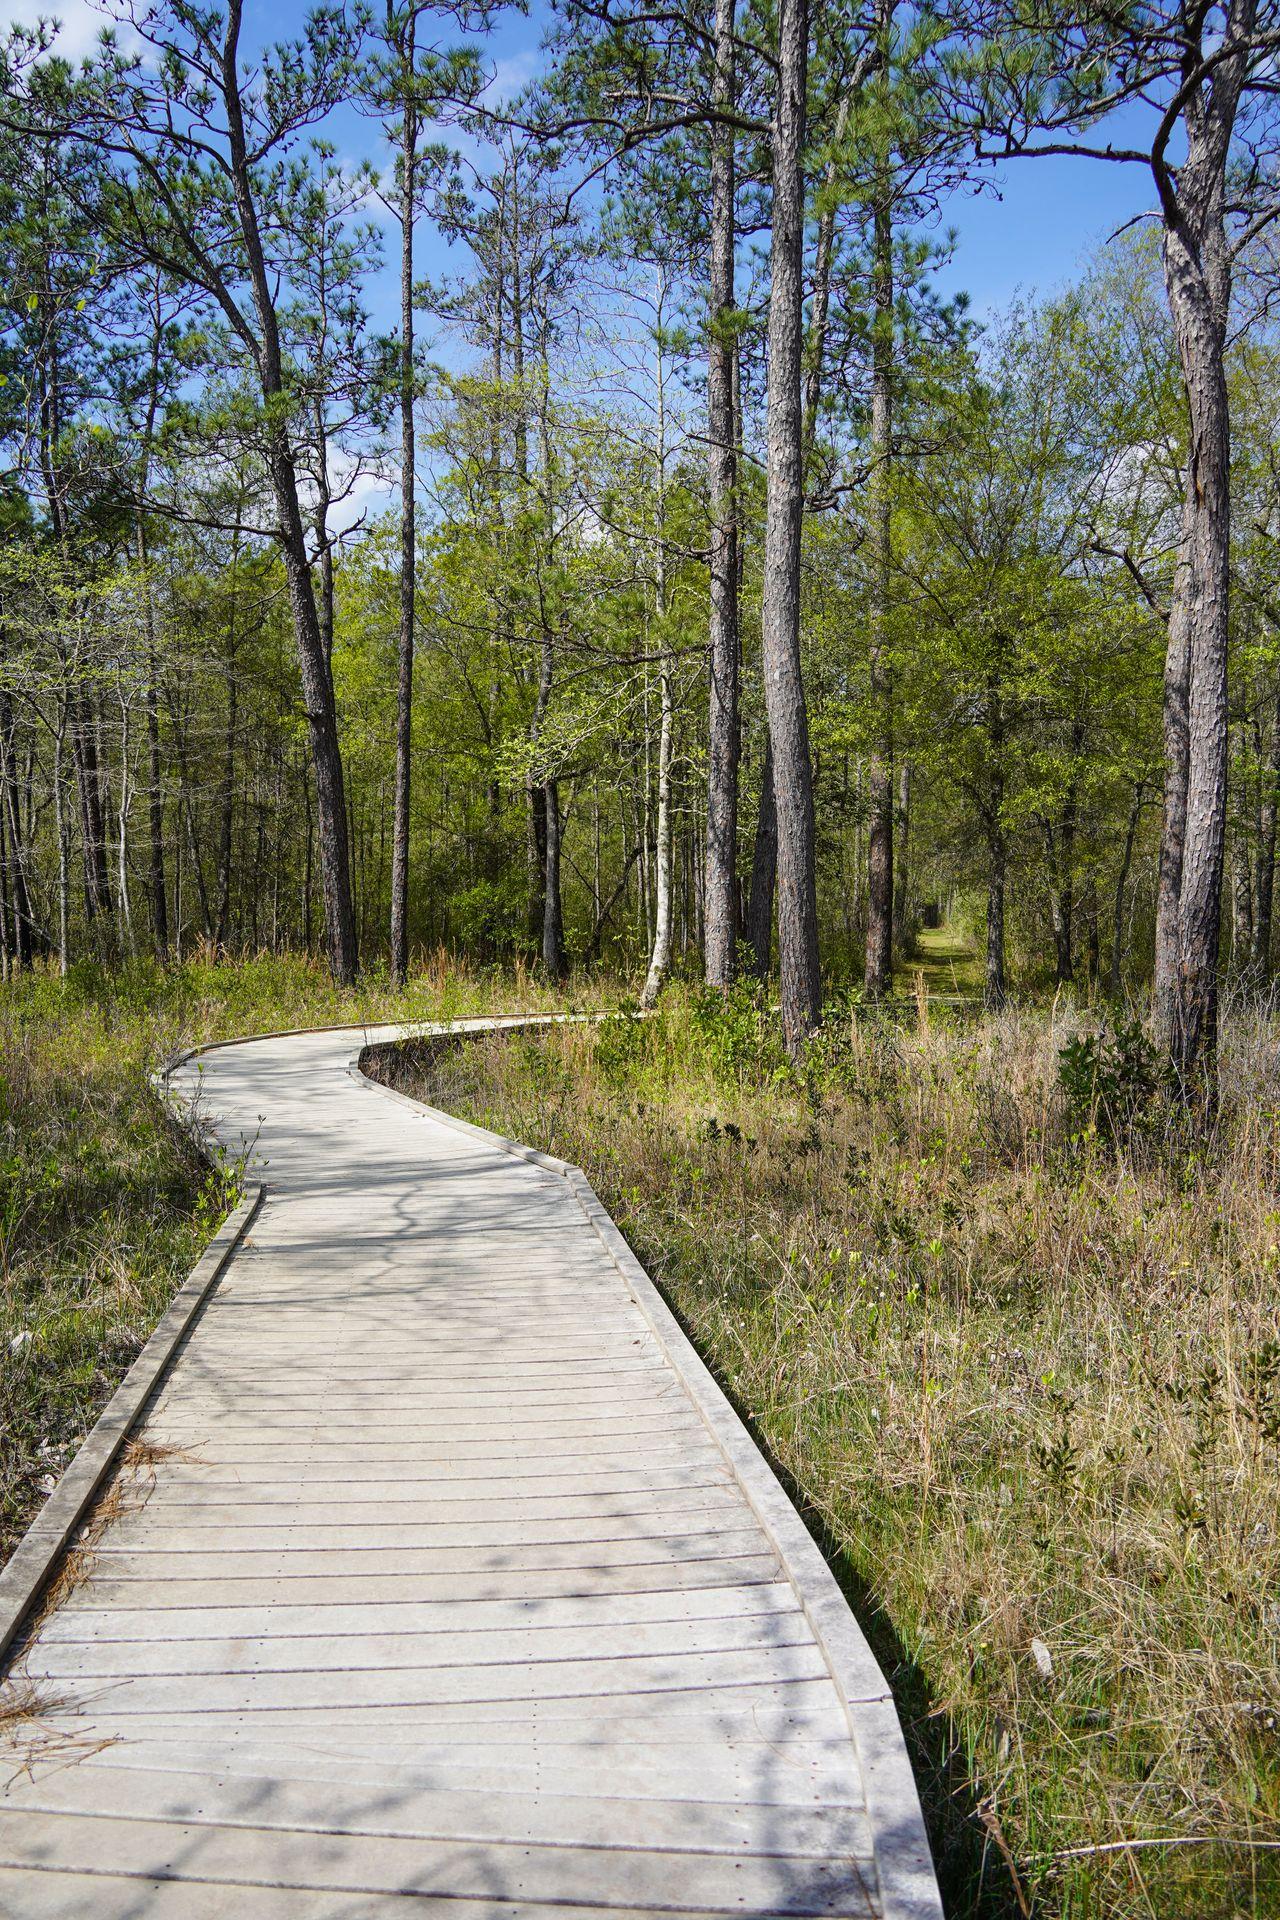 A boardwalk trail surrounded by some green plants with trees in the distance.